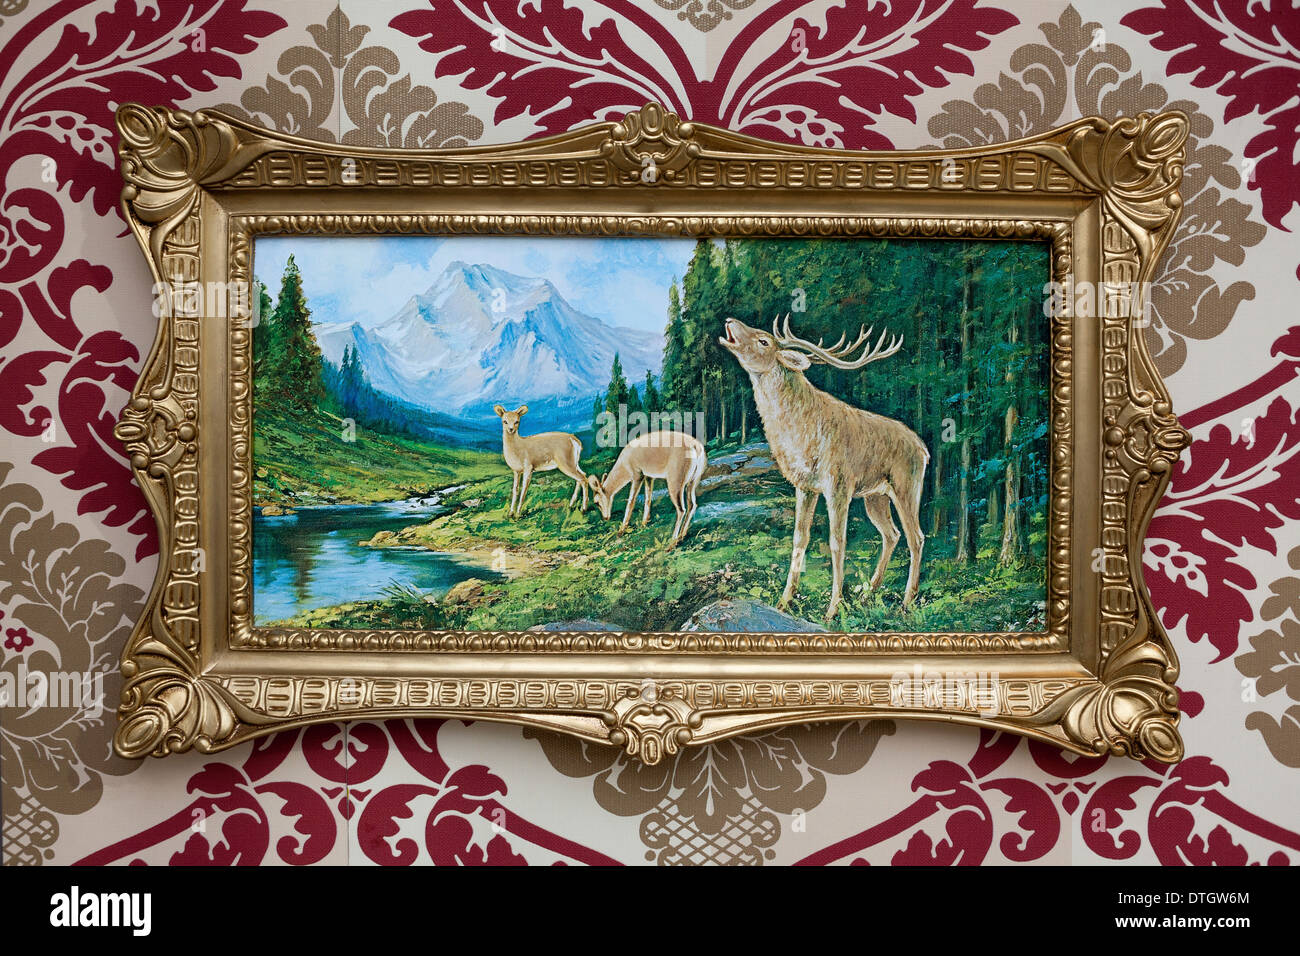 Trashy deer picture in a plastic gold frame on patterned wallpaper Stock Photo